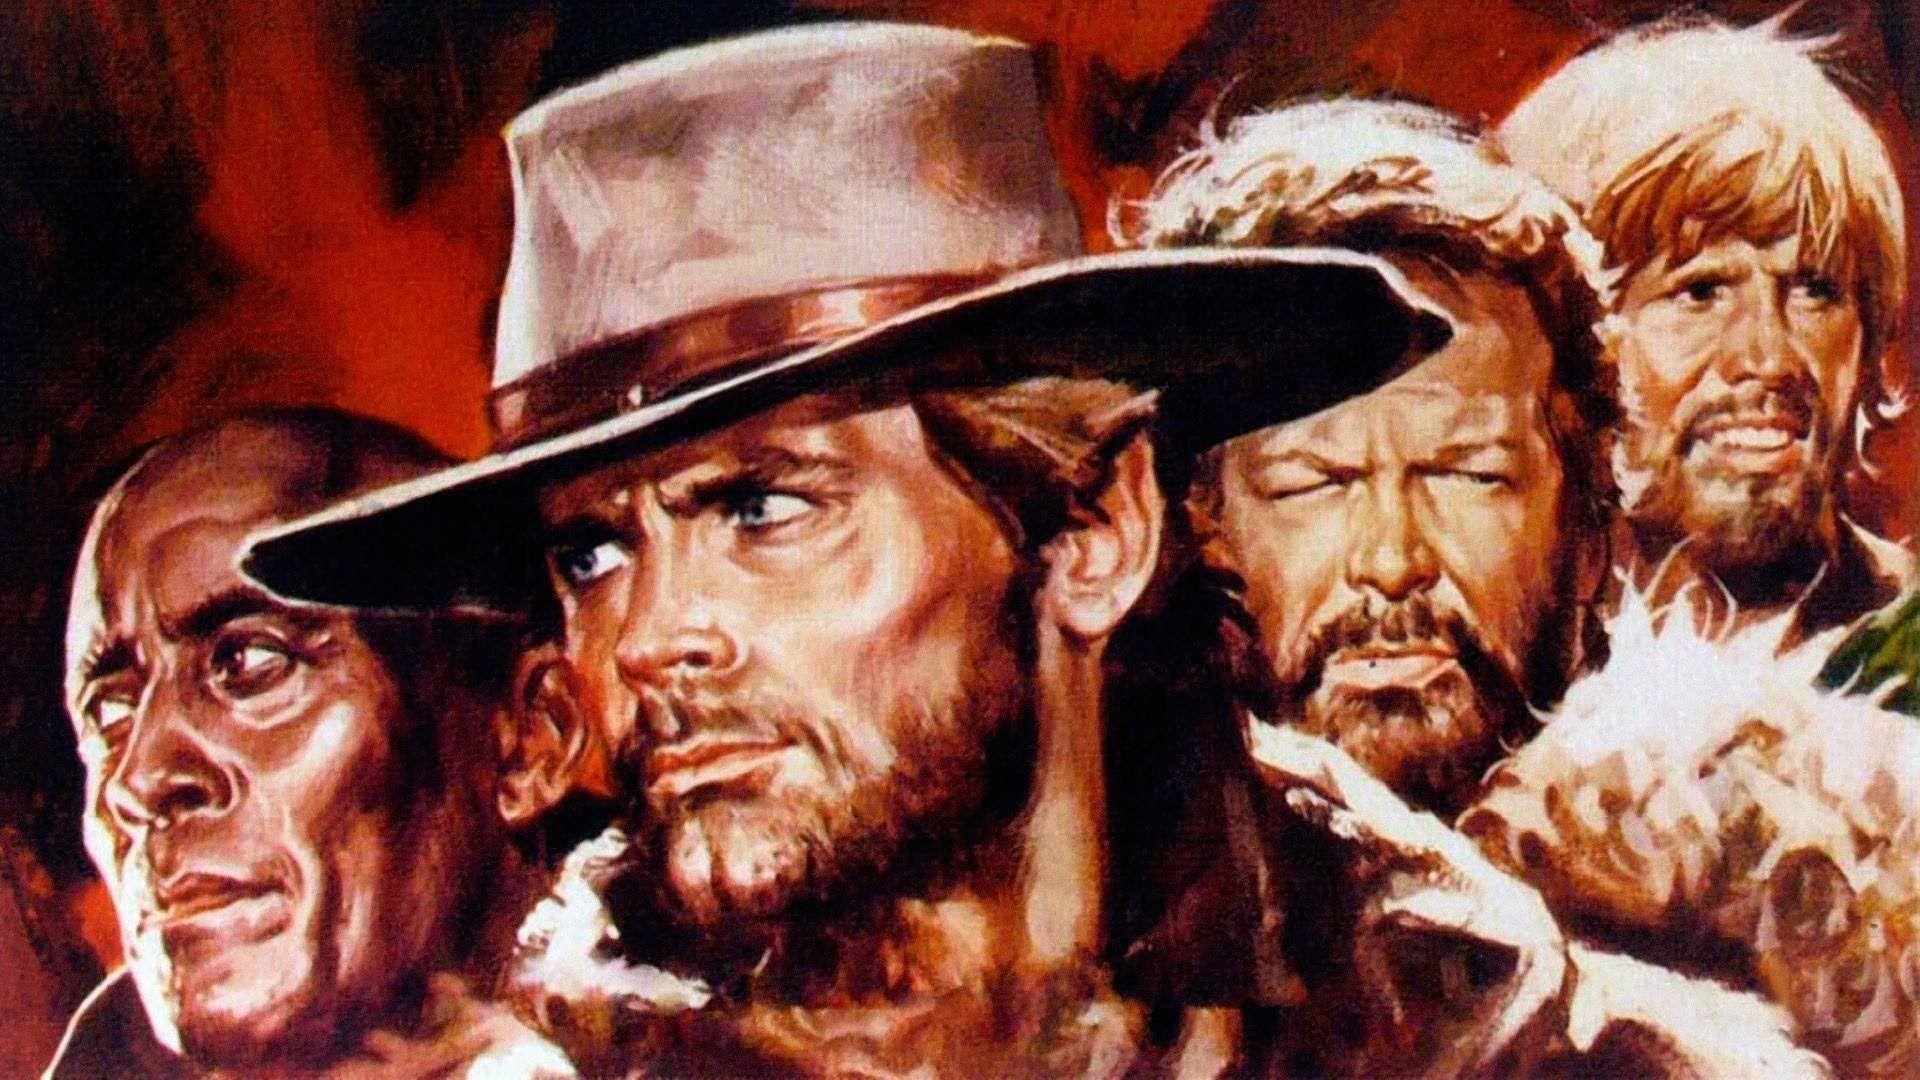 Bud Spencer & Terence Hill (Minimal House)